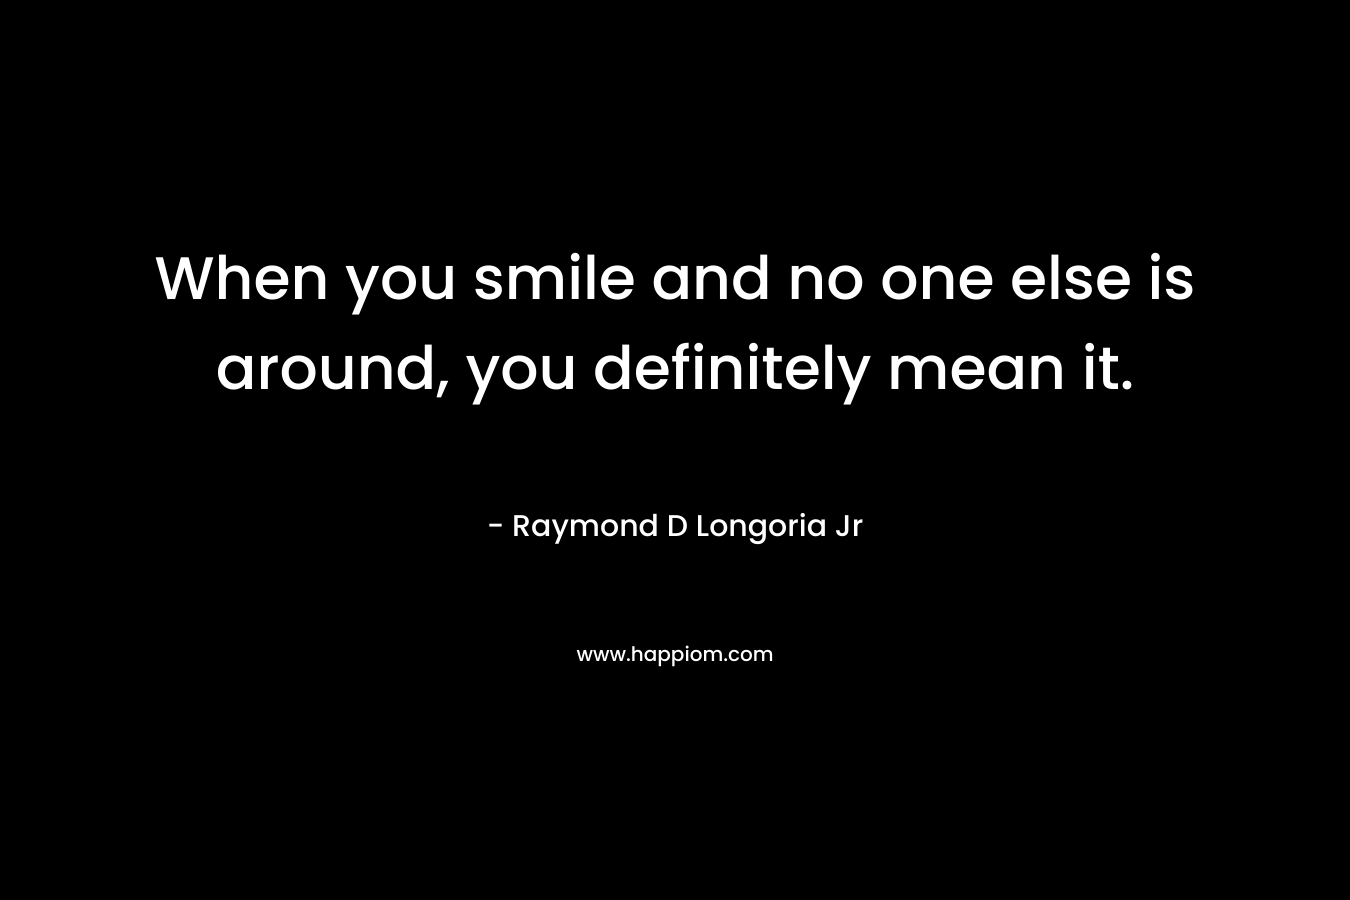 When you smile and no one else is around, you definitely mean it. – Raymond D Longoria Jr